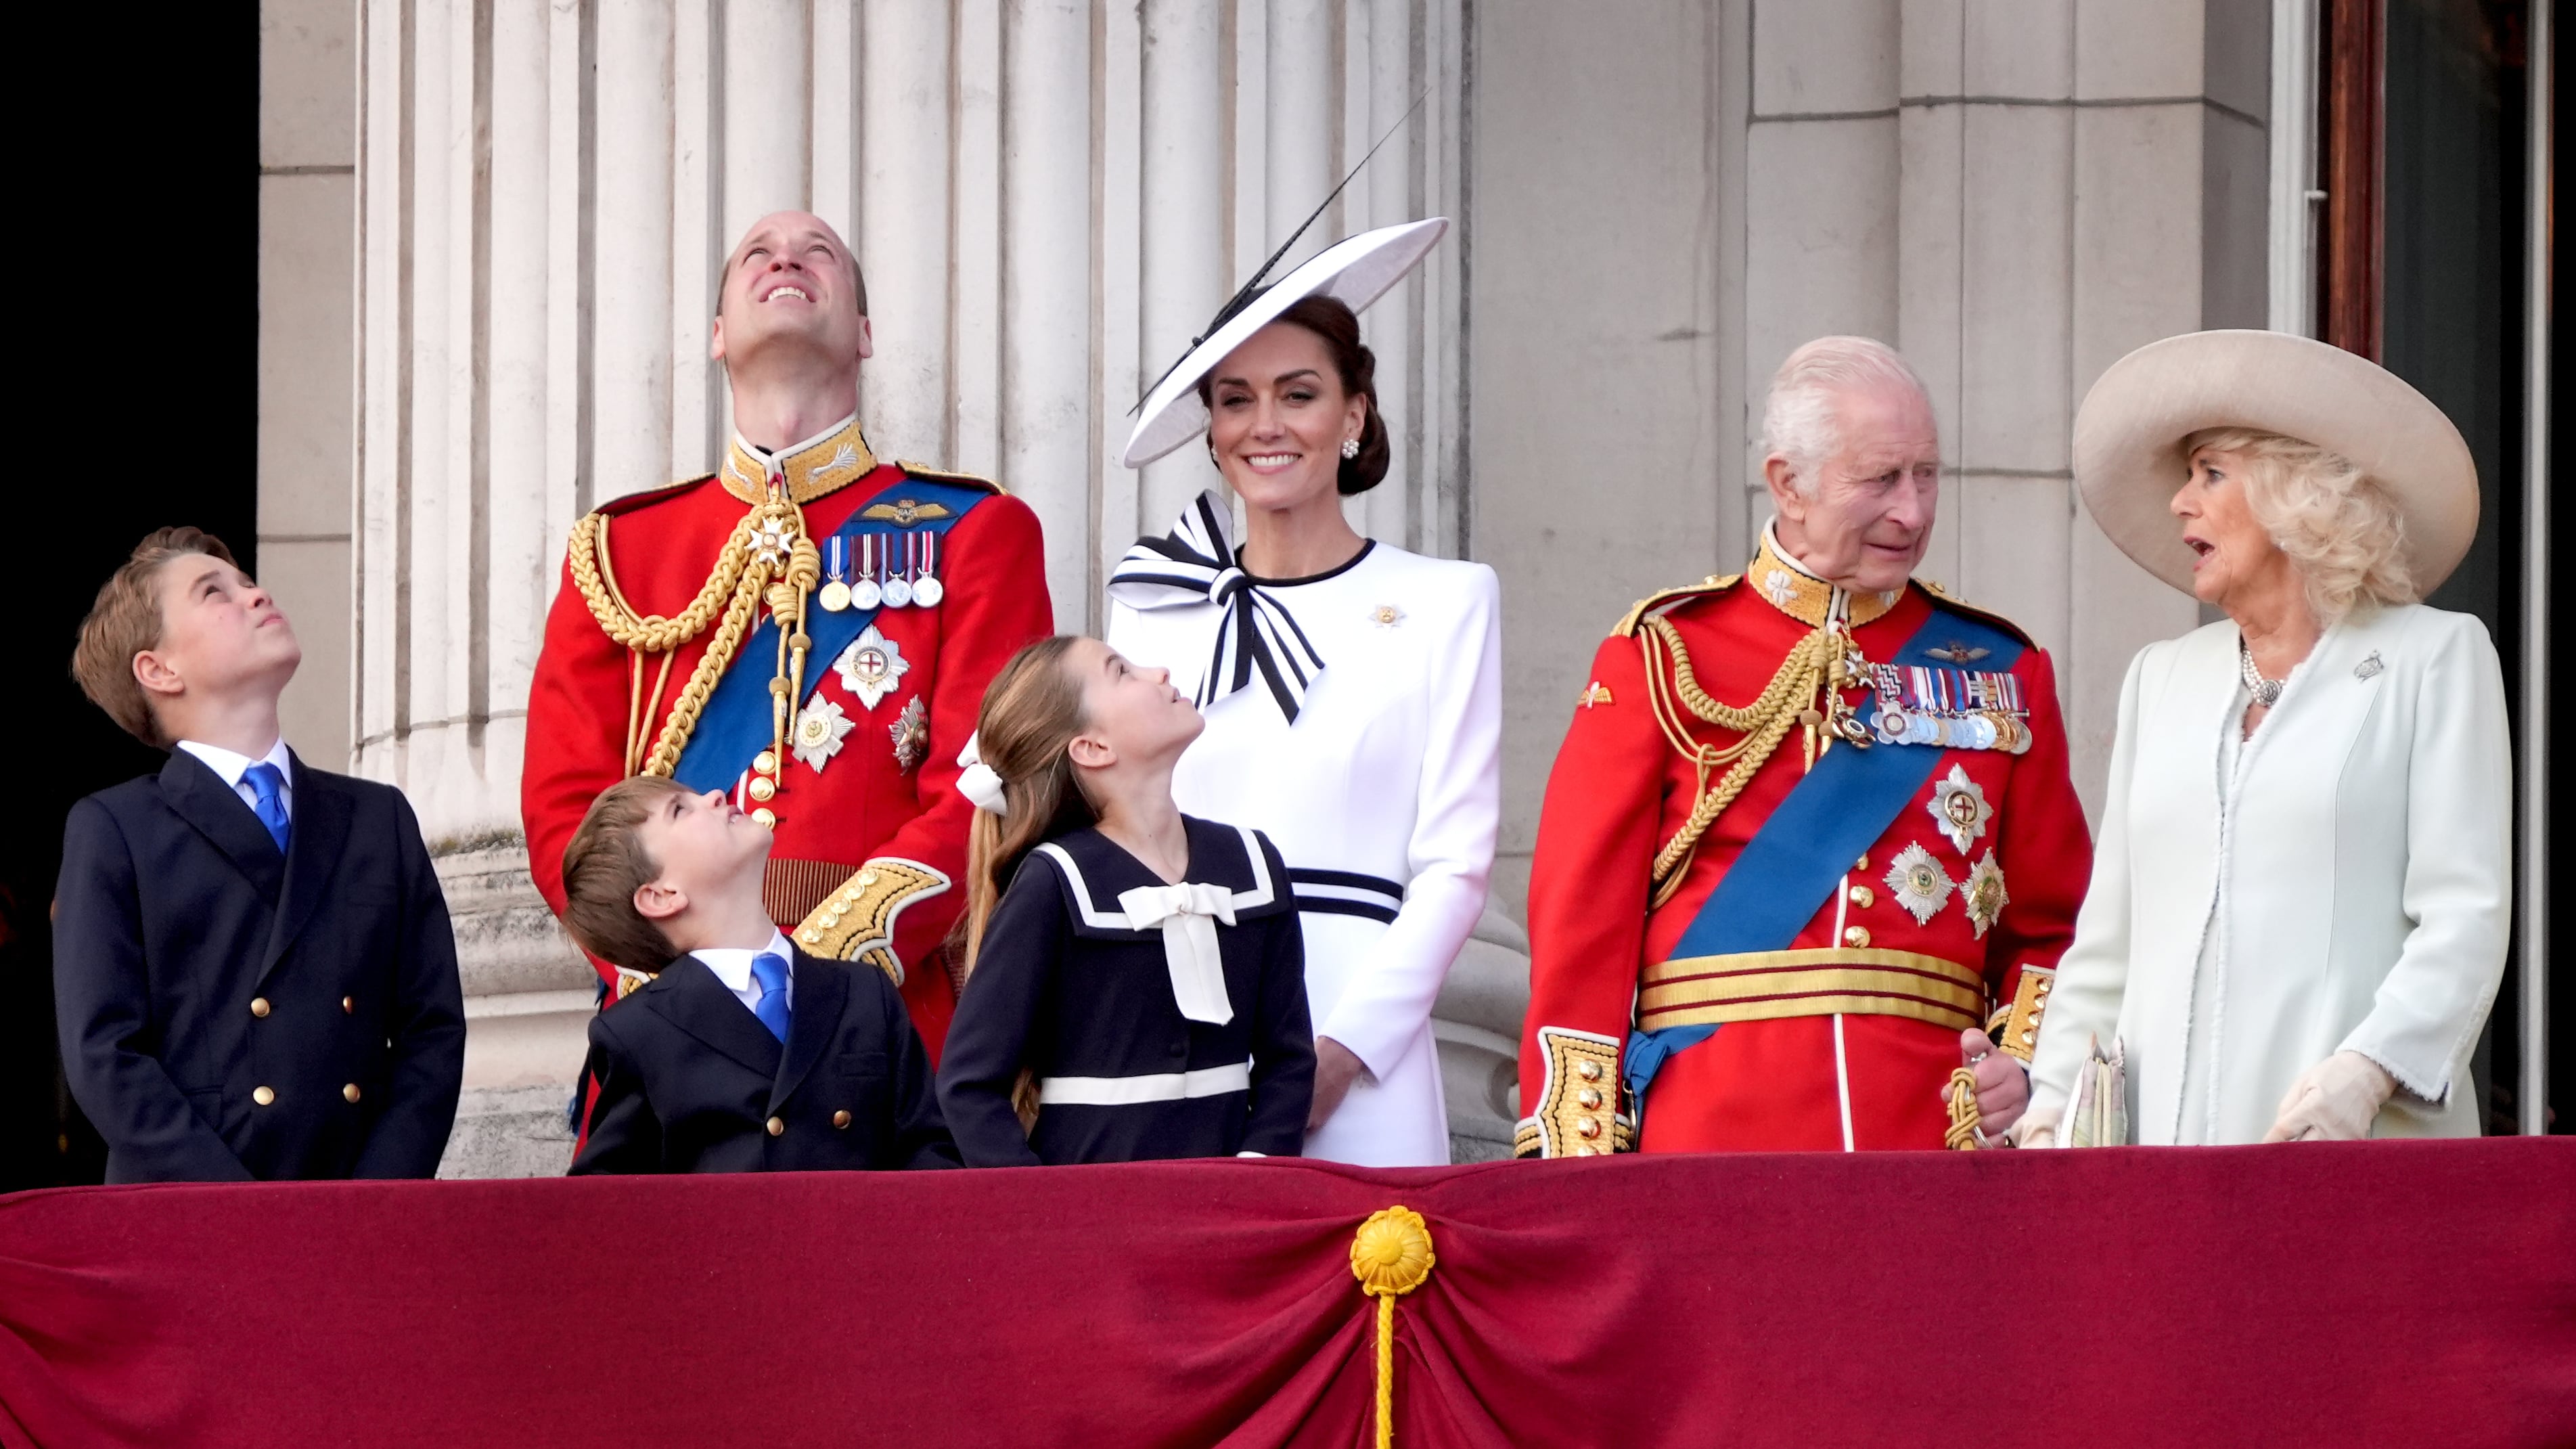 The Prince and Princess of Wales with their children, Prince George, Prince Louis and Princess Charlotte and the King and Queen on the balcony of Buckingham Palace